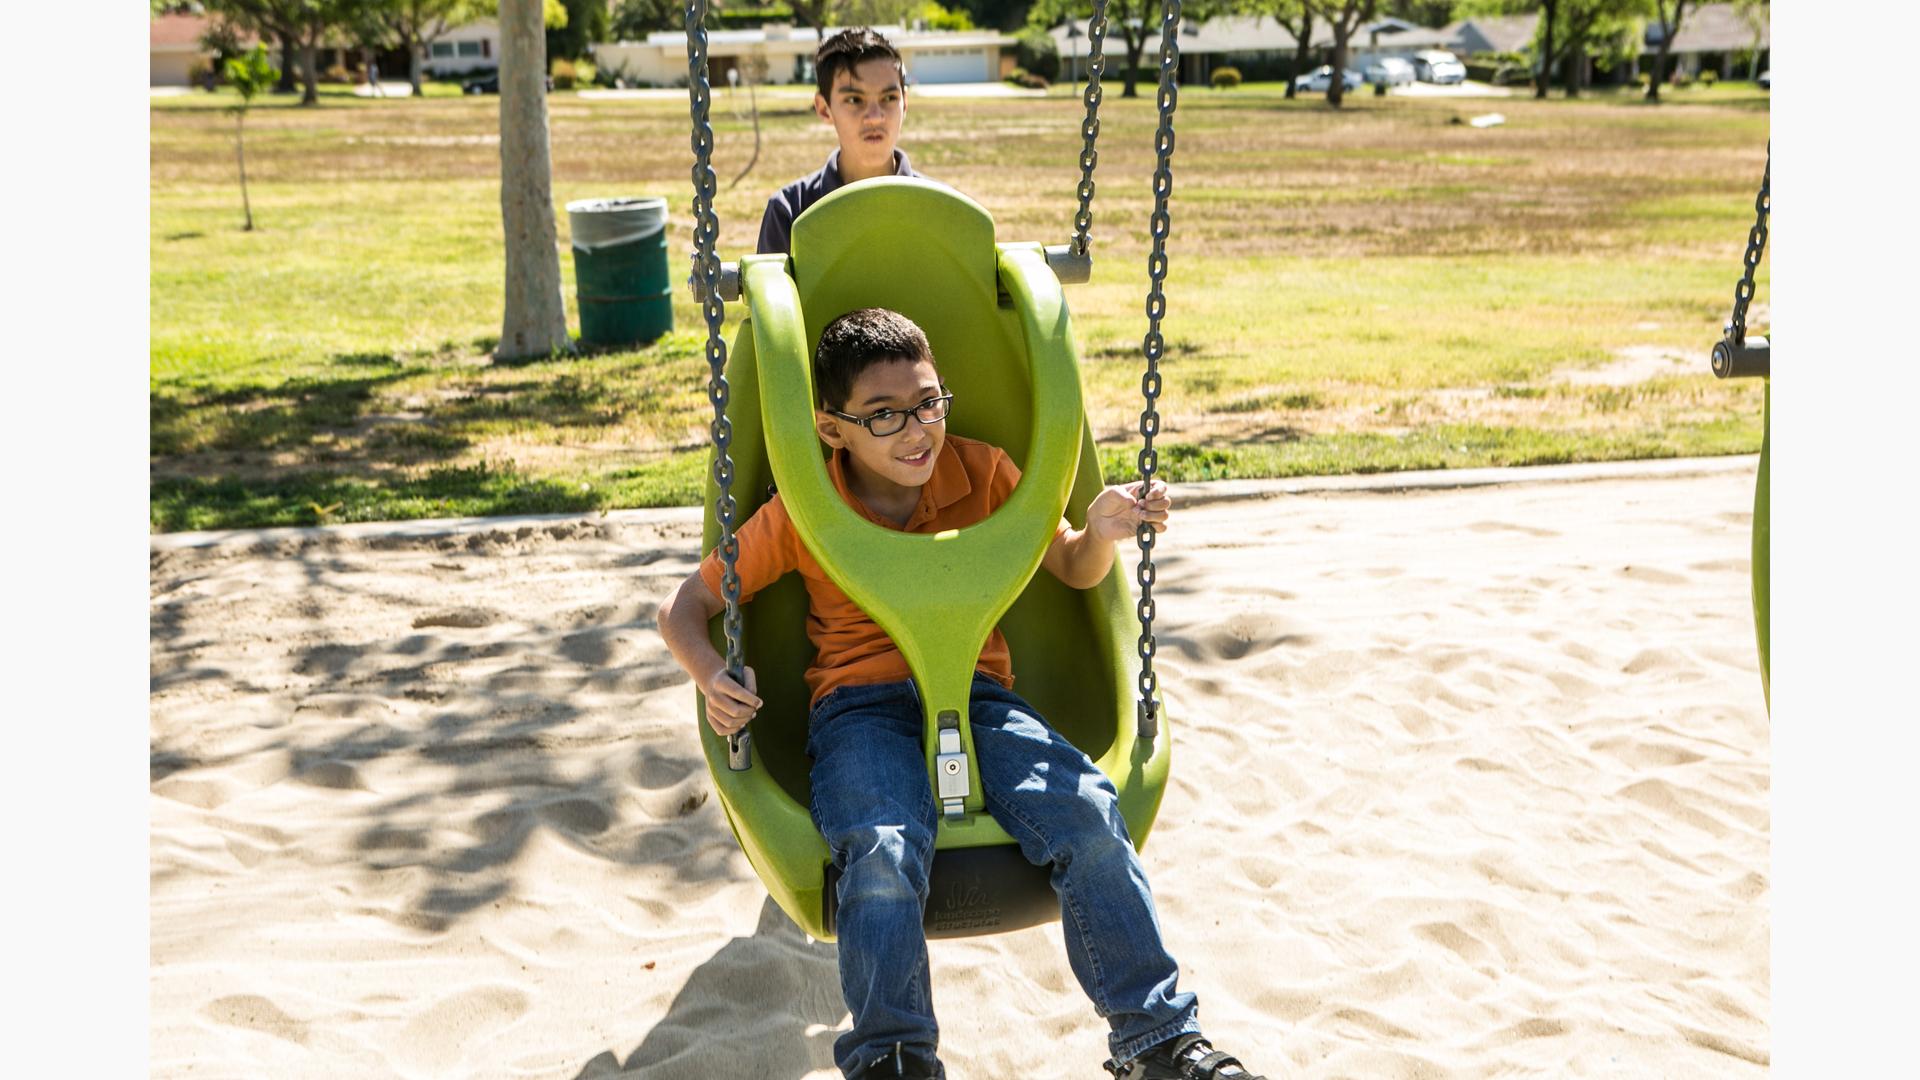 The Molded Bucket Seat with Harness and Chains for Ages 5 to 12 is a great swing seat option for all abilities